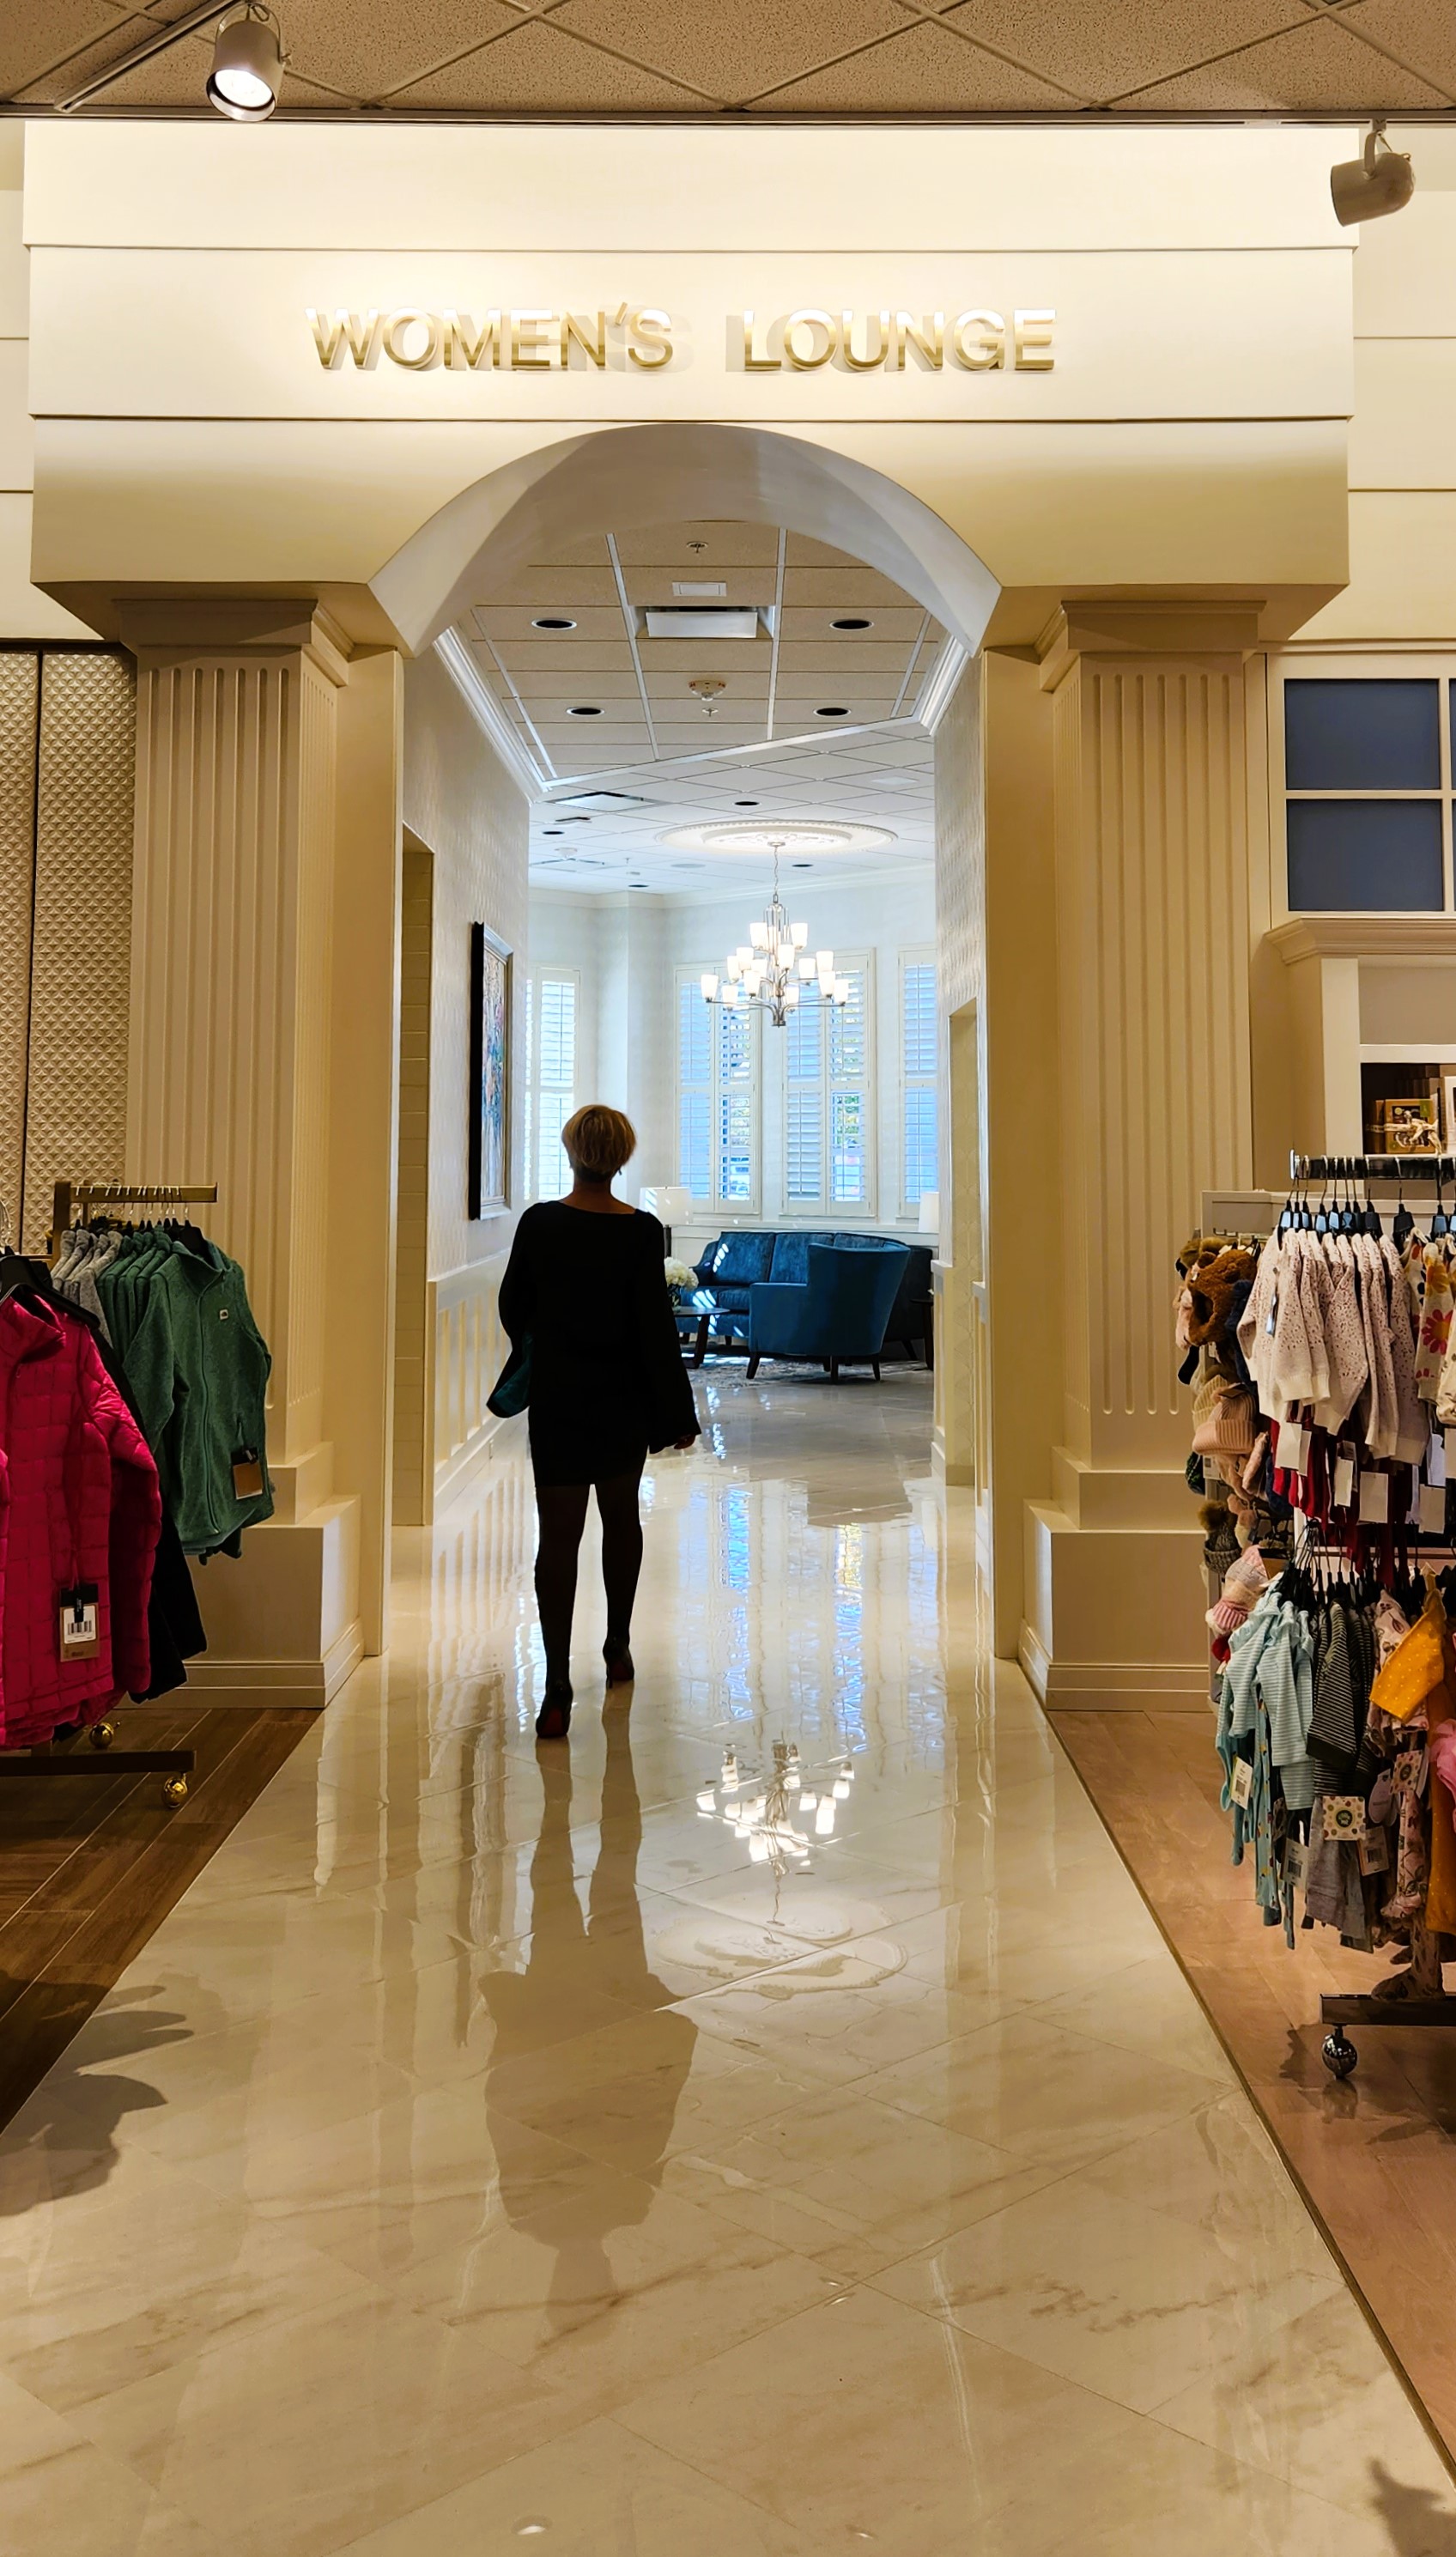 Take a peek inside the Von Maur store at West Towne Mall